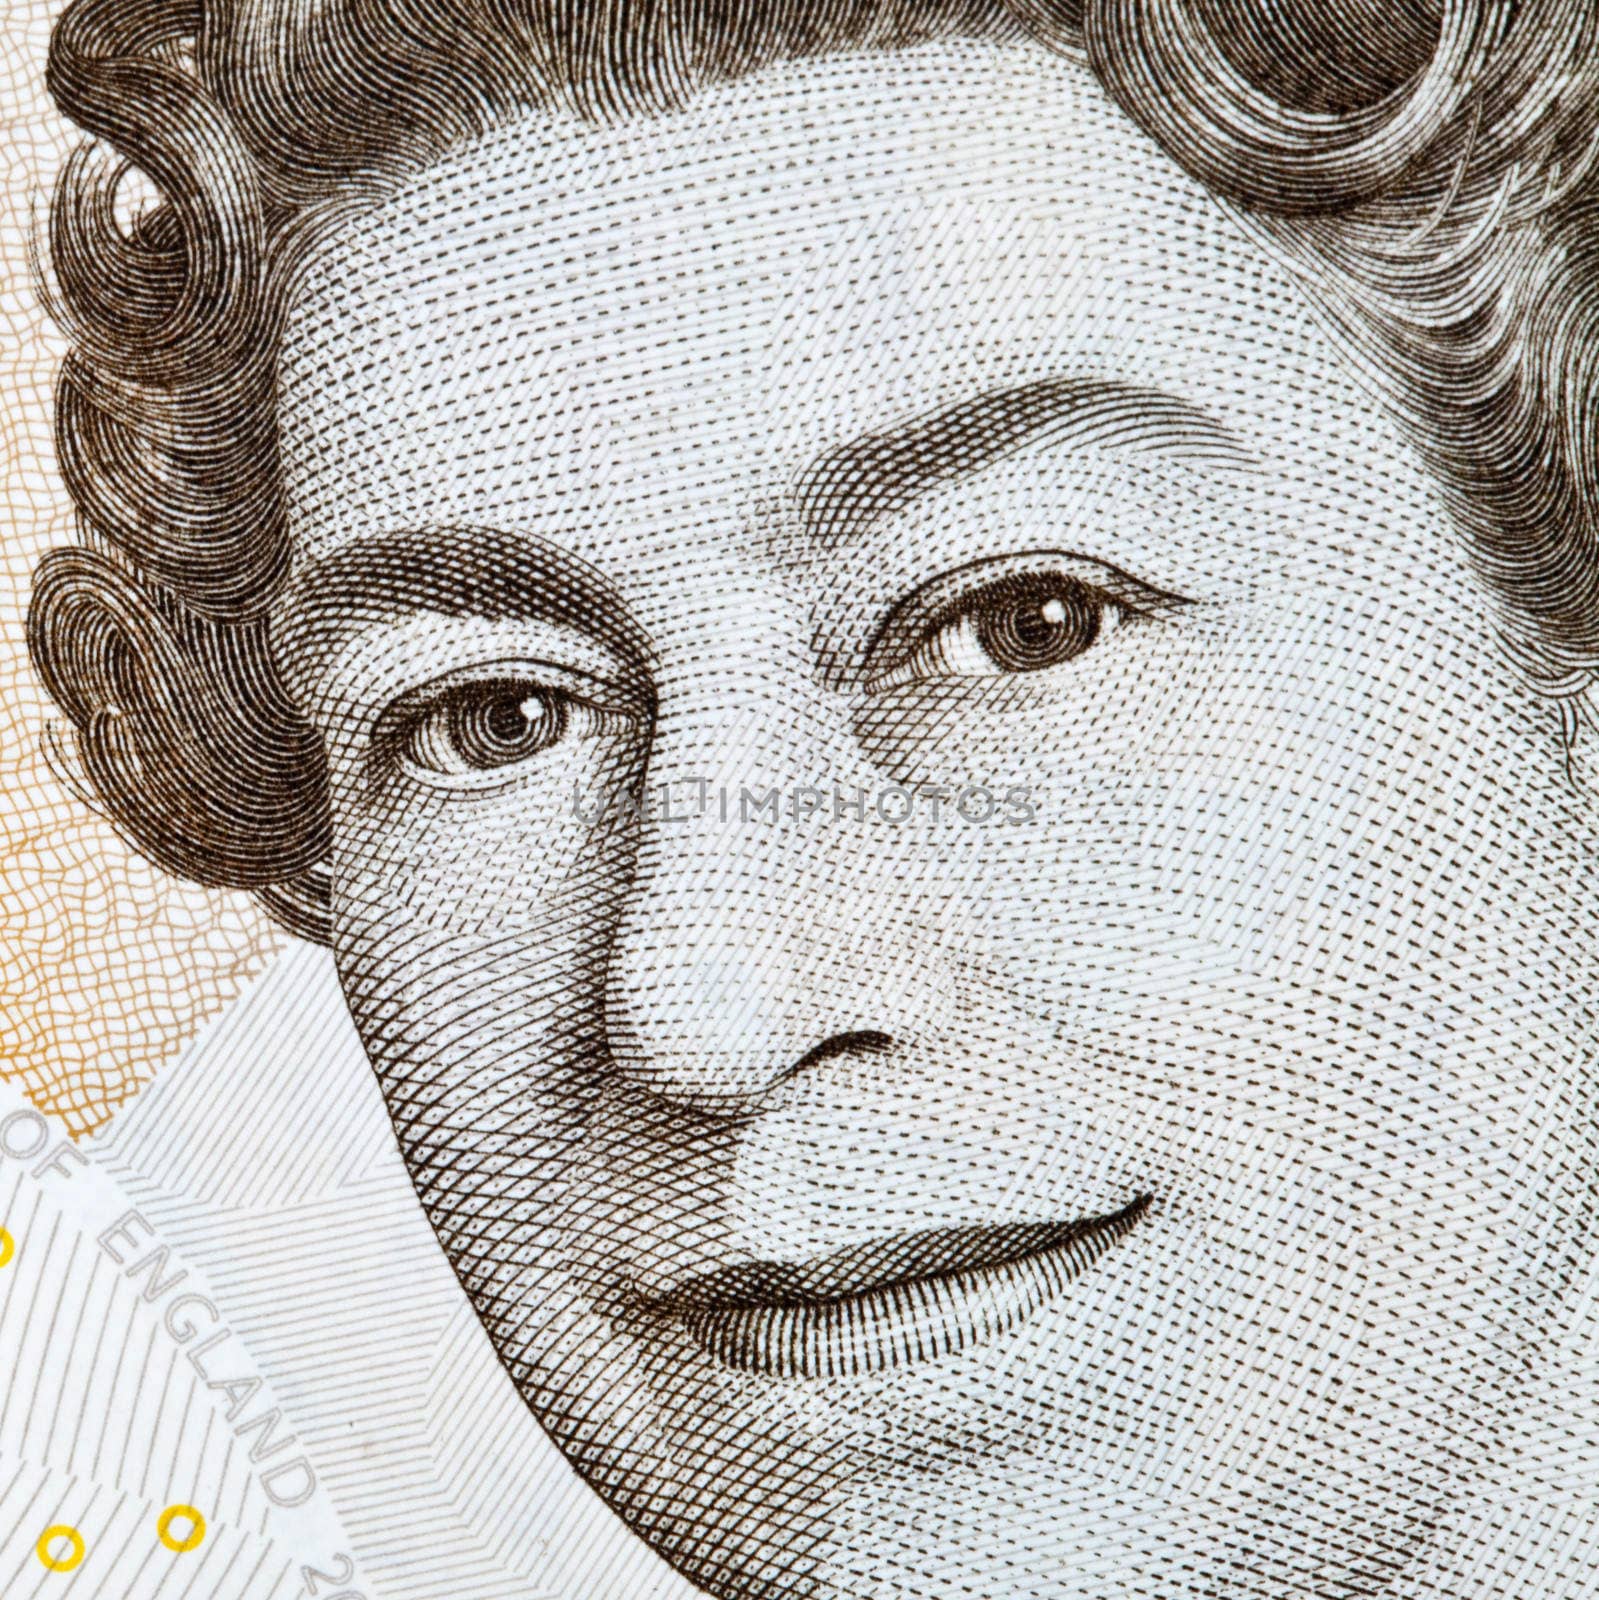 The Queen on an English Banknote by chrisdorney